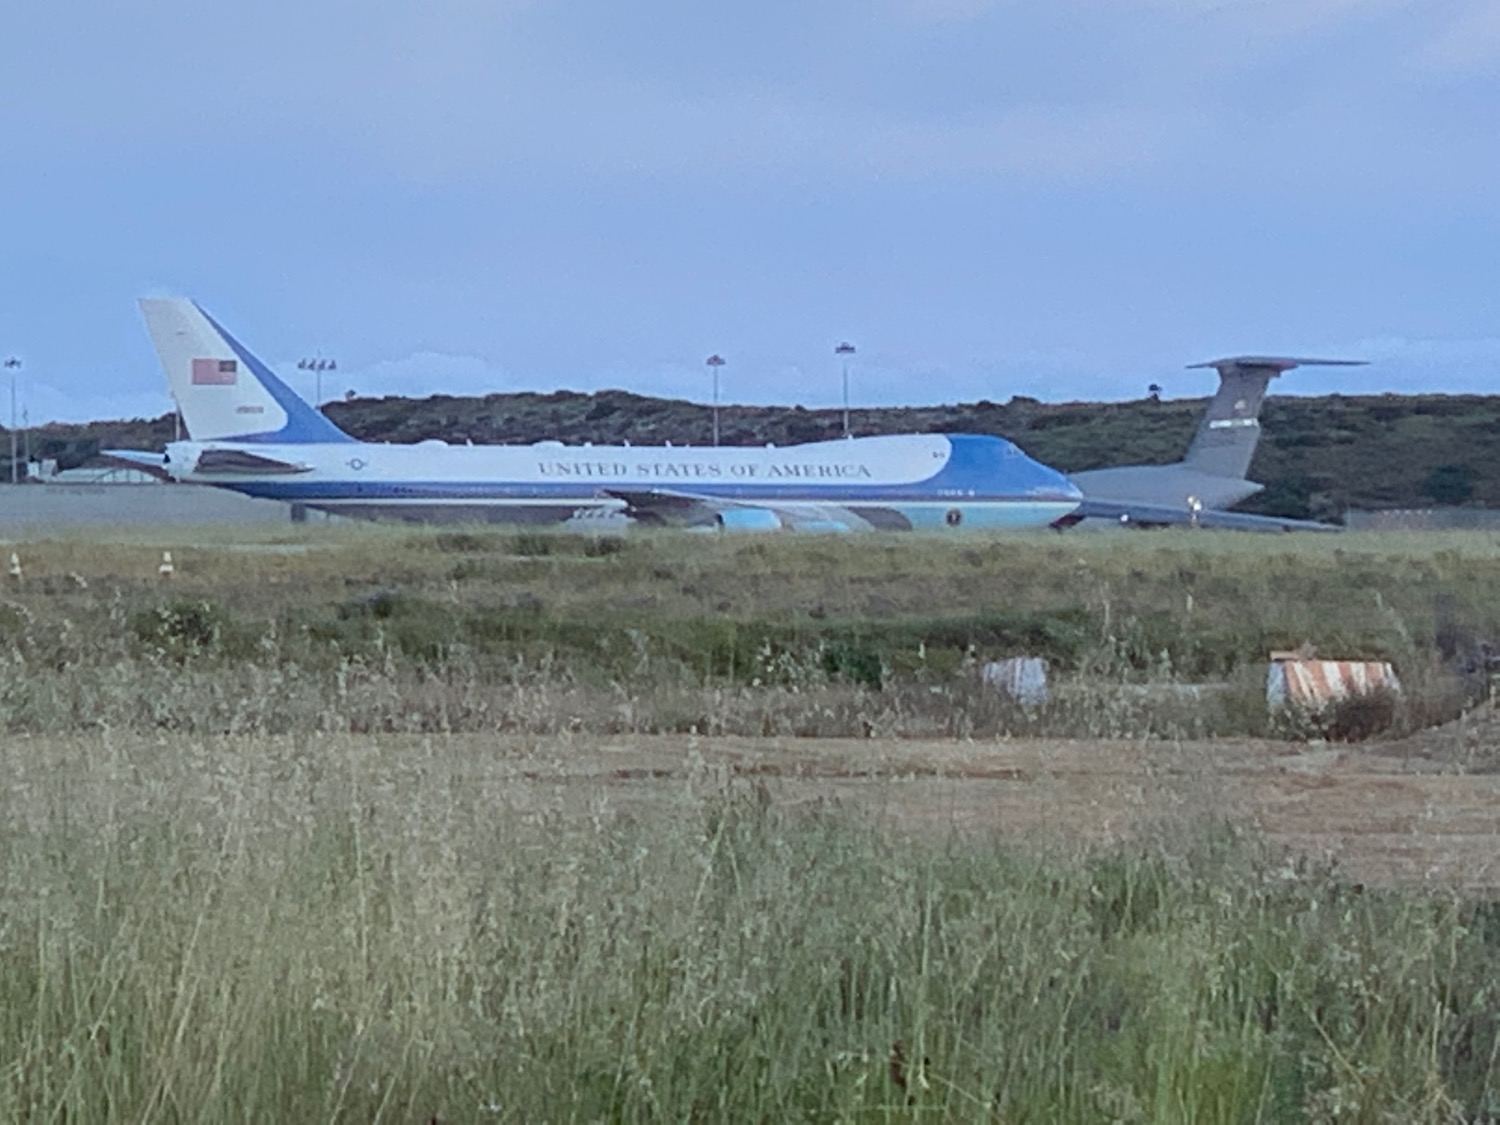 where did air force one land today